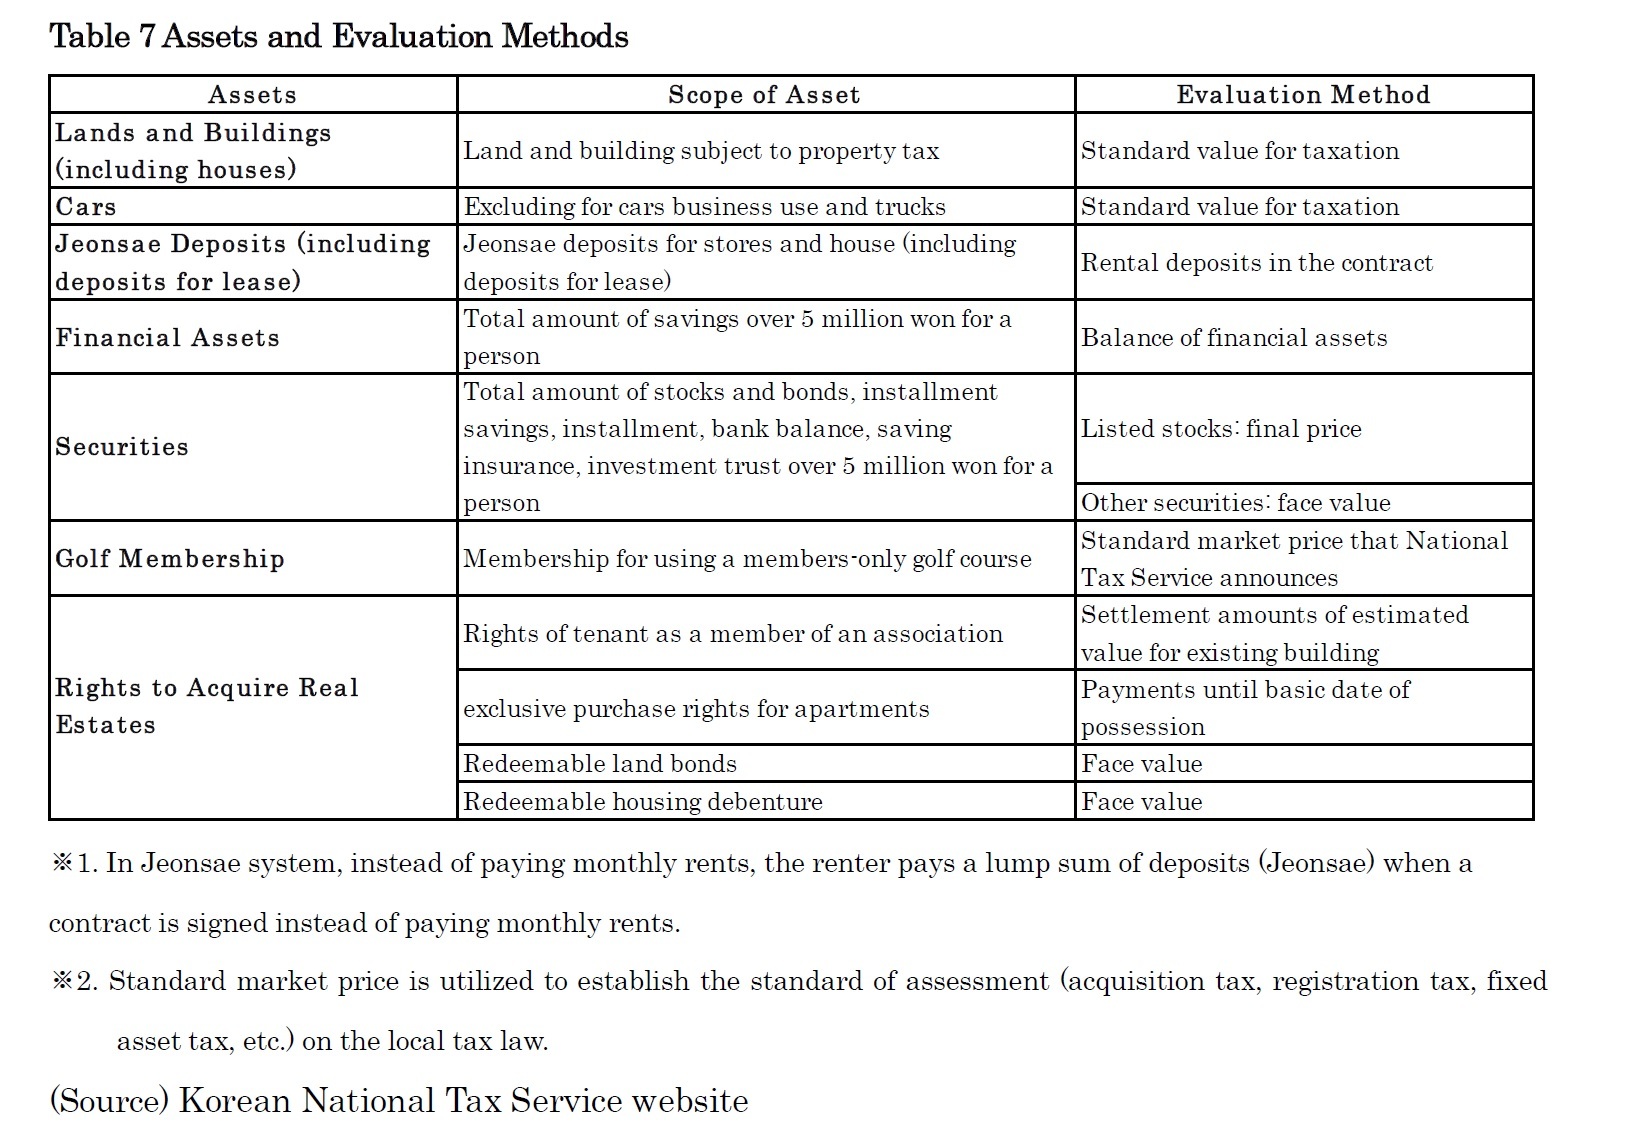 Table 7 Assets and Evaluation Methods